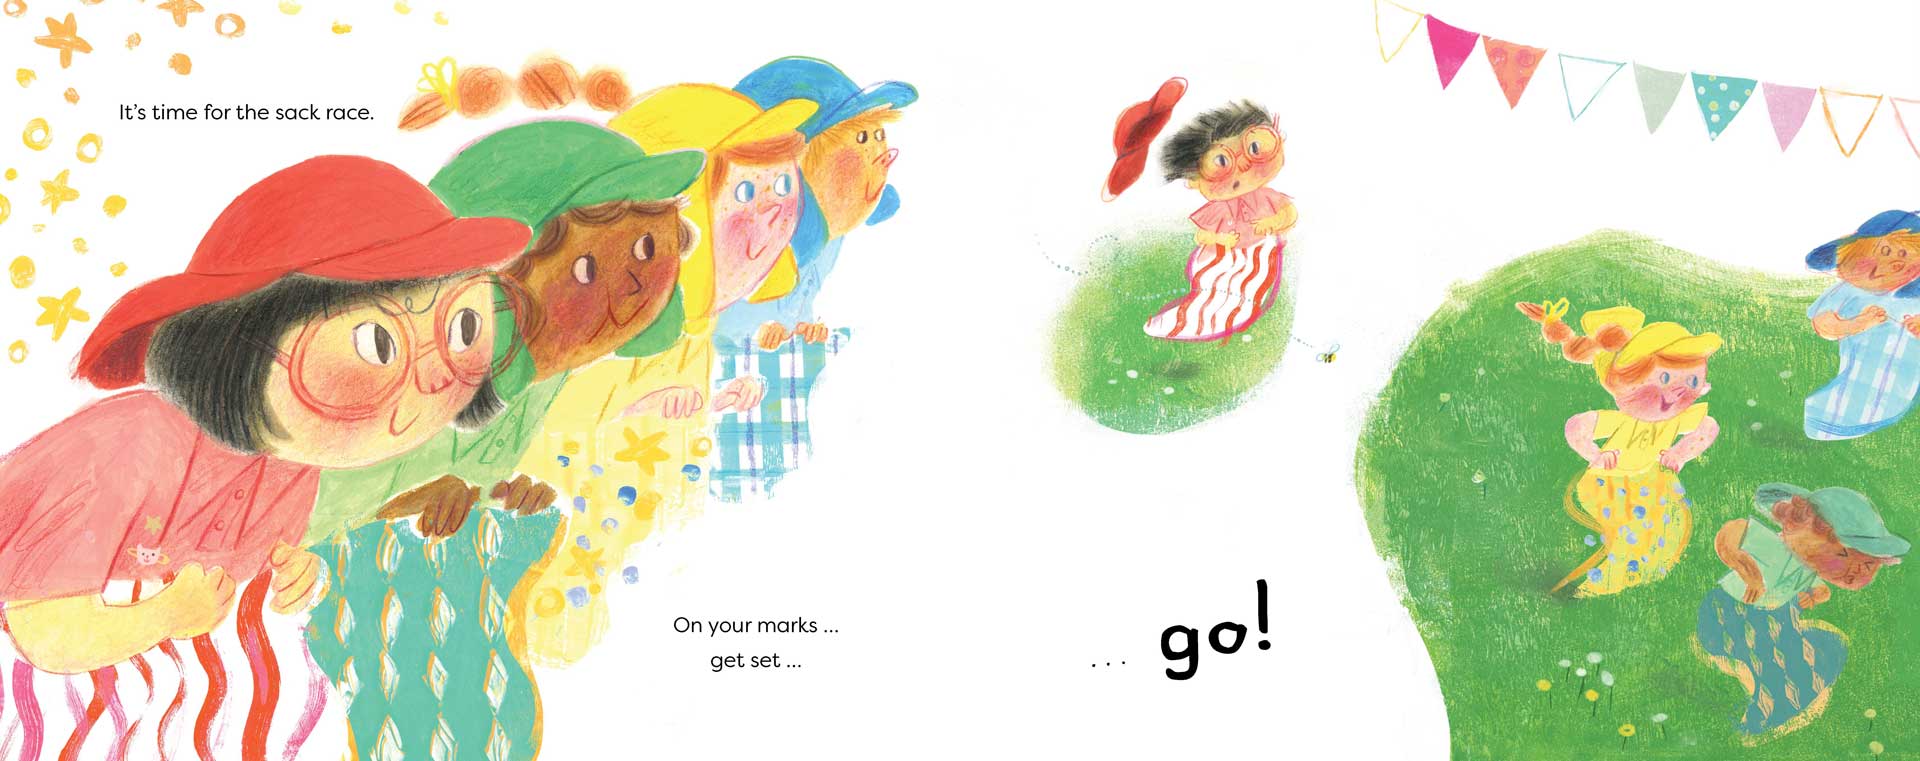 Last-Place Lin by Wai Chim, illustrated by Freda Chiu spread 1